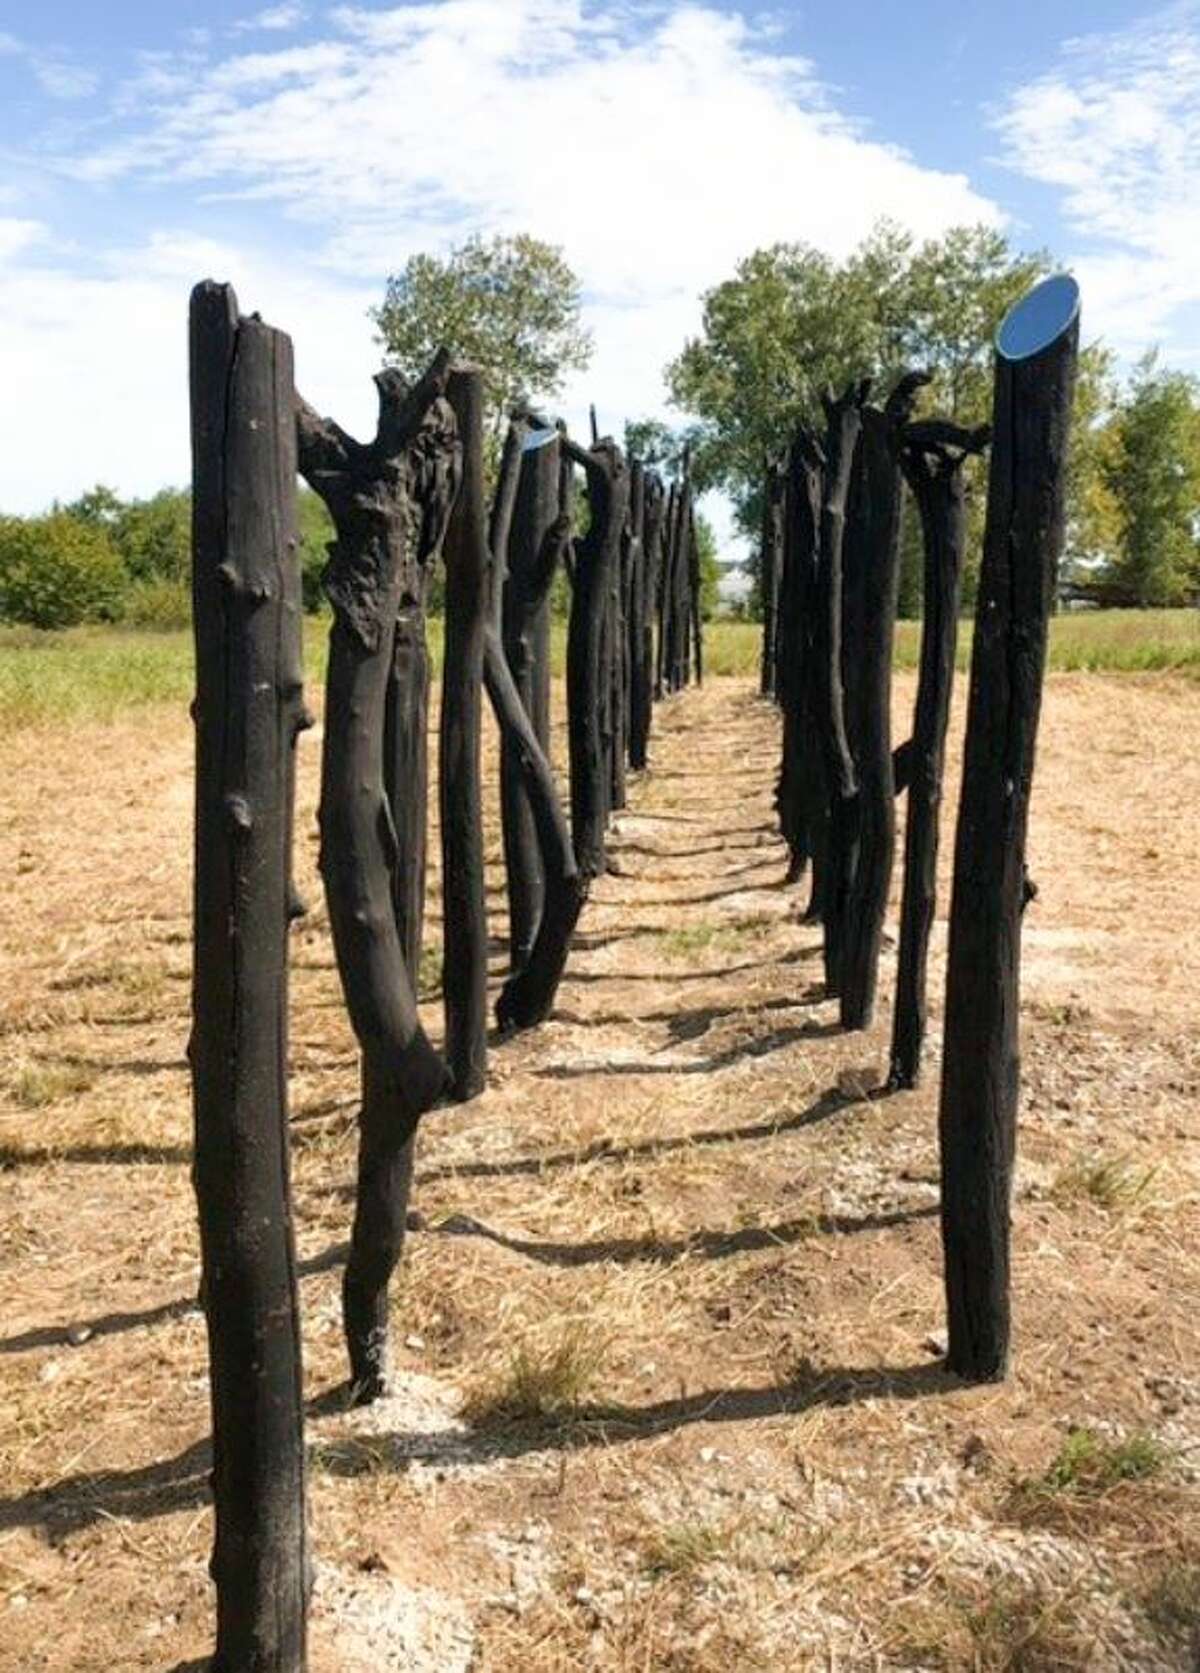 The Audubon Center at Riverlands will celebrate “River Ark,” a site specific installation created by artist Thomas Sleet, on Oct. 22.